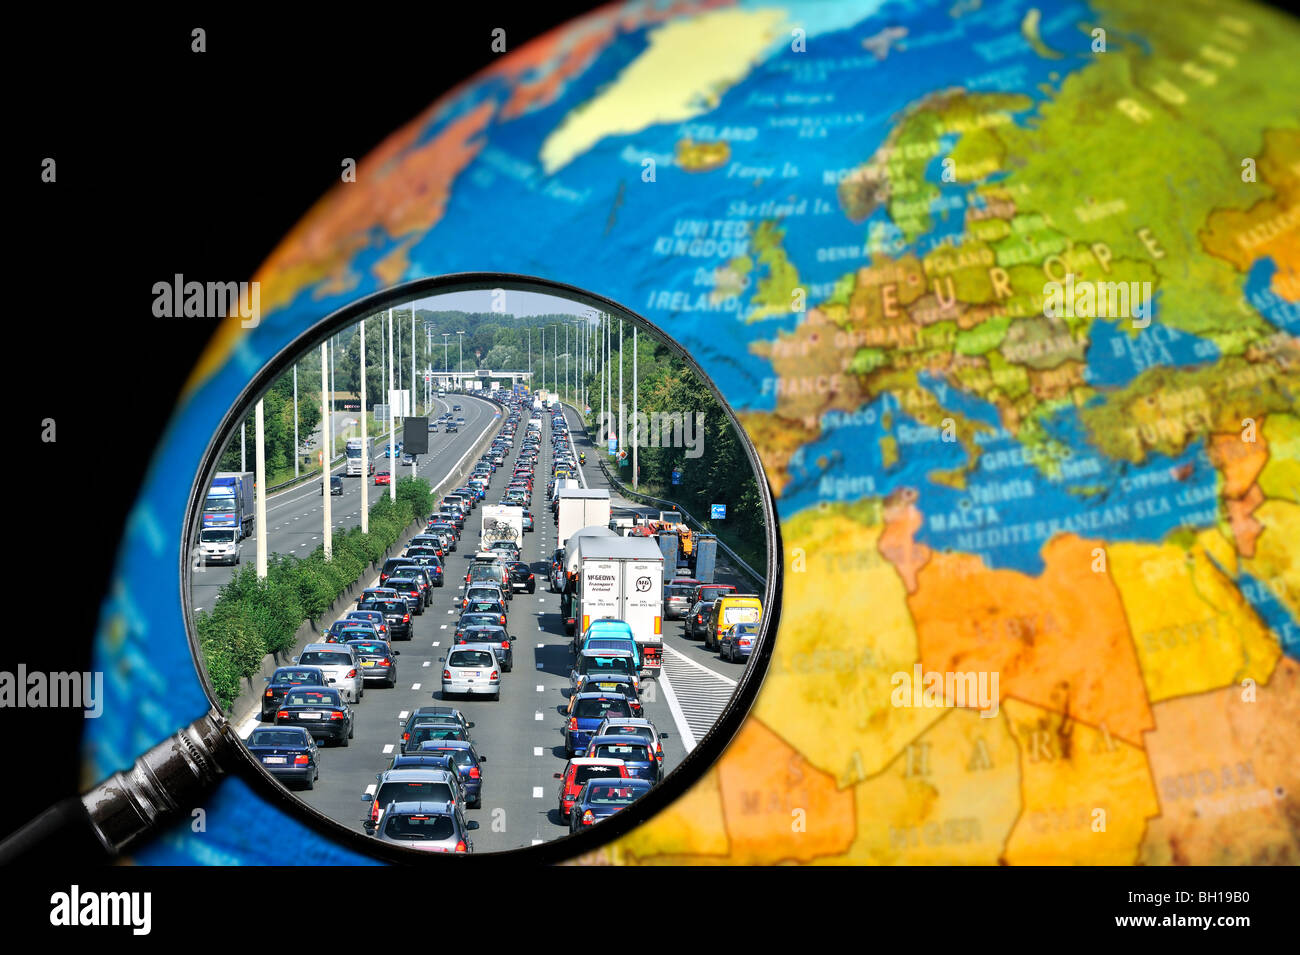 Cars in traffic jam on motorway during summer holidays seen through magnifying glass held against illuminated terrestrial globe Stock Photo